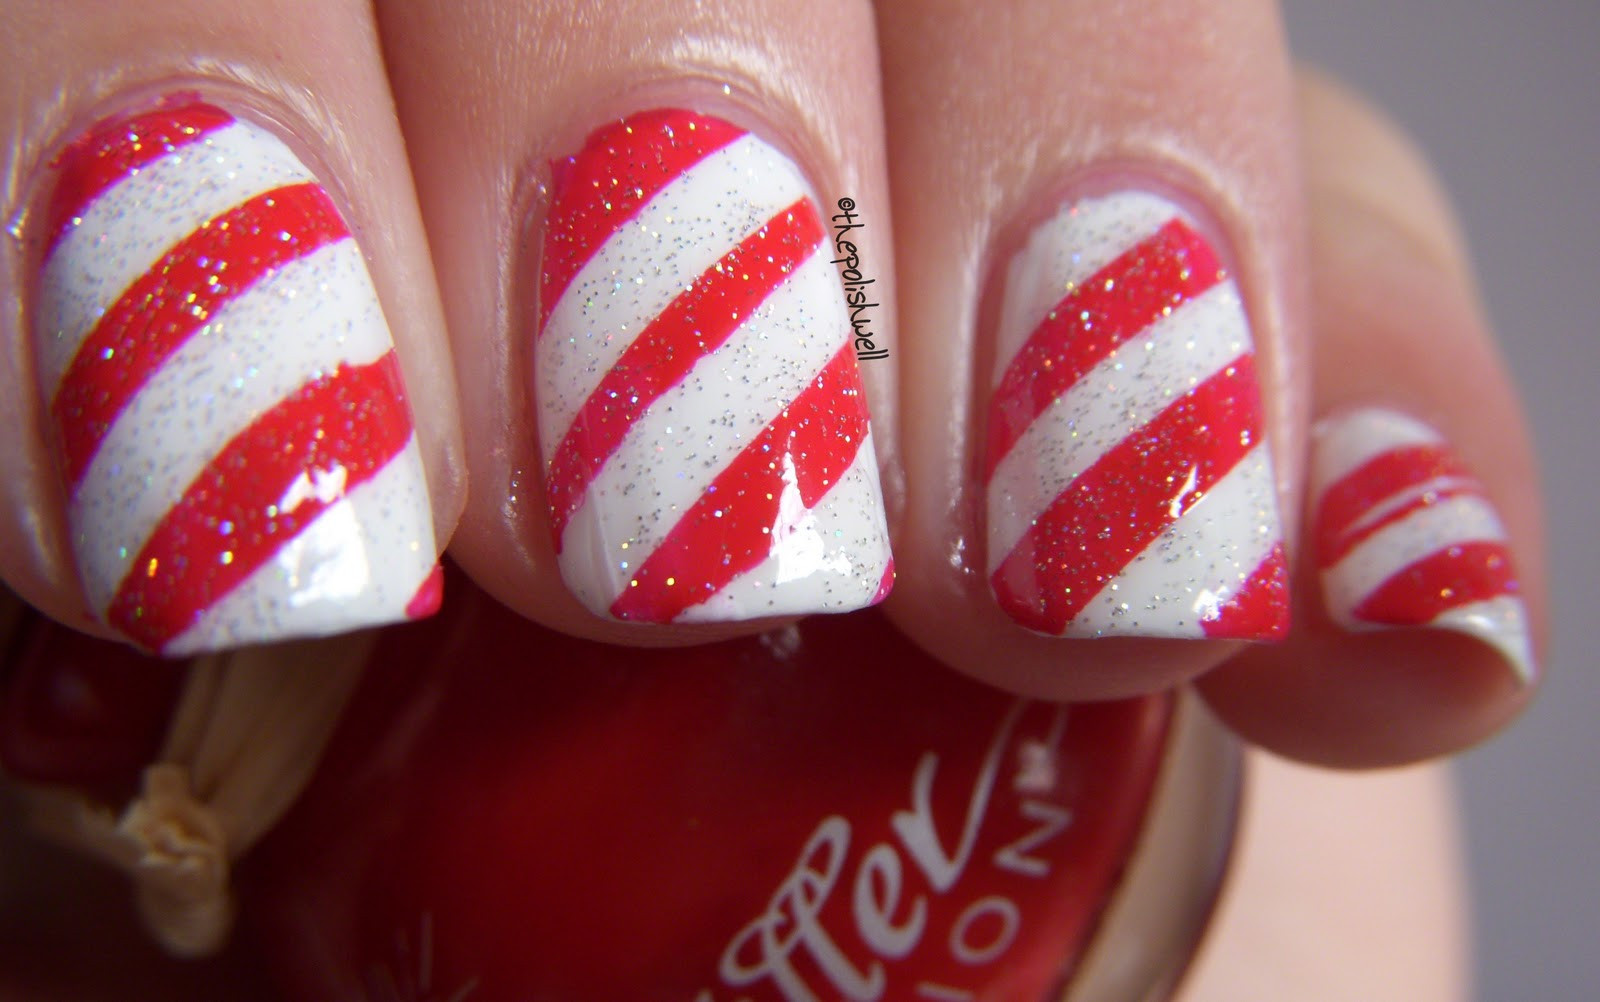 Christmas Nails Candy Cane
 The Polish Well 12 Days of Christmas Day 8 Candy Cane